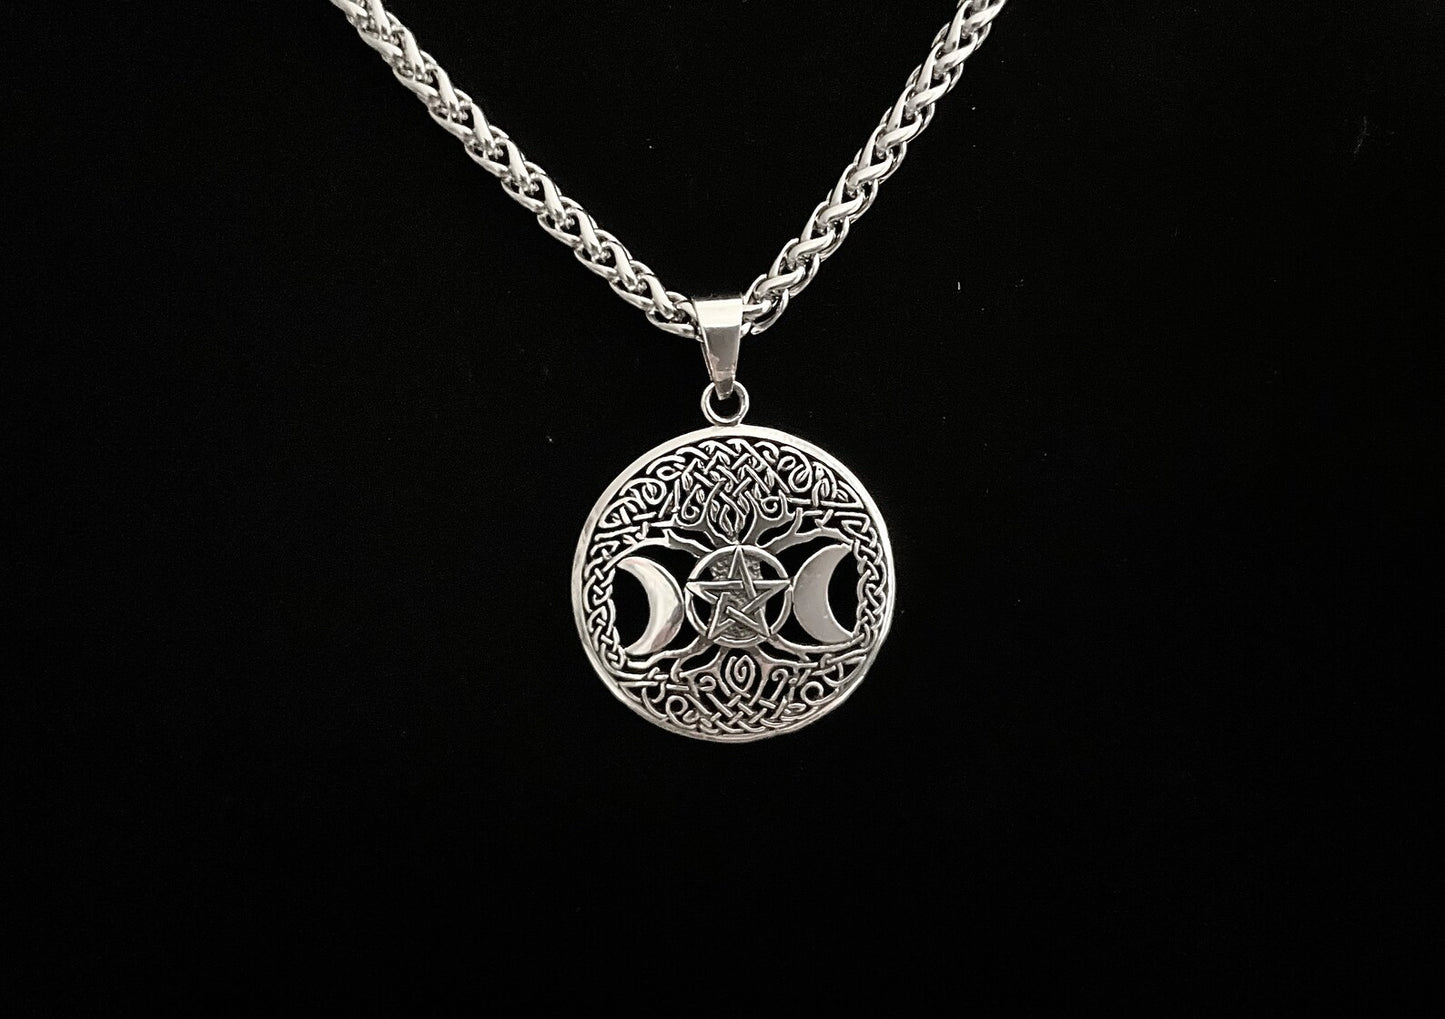 925 Sterling Silver Celtic Tree of Life Triple Goddess Pentacle Pendant + Free Chain